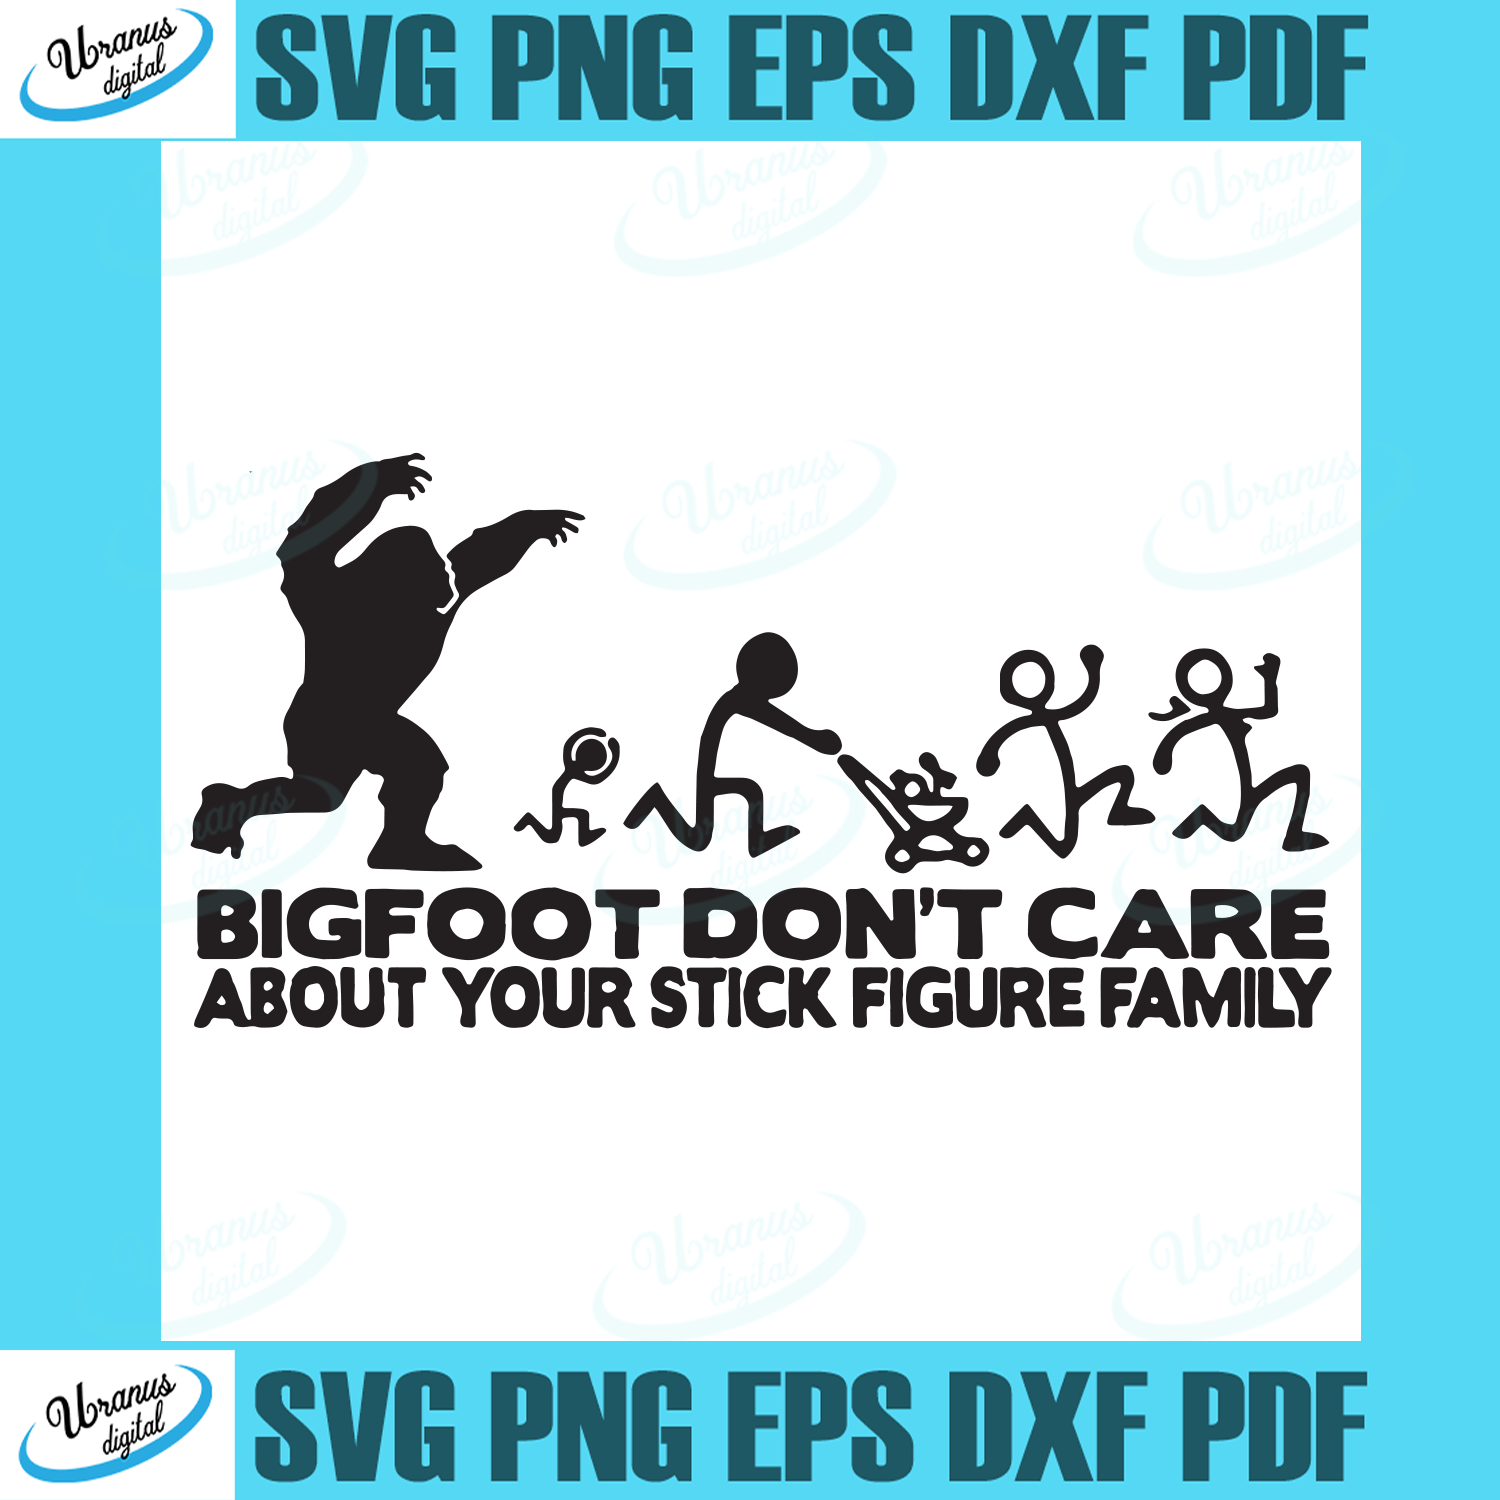 Download Trending Svg Svg Bigfoot Svg Don T Care About Your Stick Figure Family Svg Funny Shirt Bigfoot Shirt Funny Sasquatch Svg Bigfoot Svg Funny Quotes Svg Svg Cricut Silhouette Svg Files Cricut Svg Silhouette Svg Svg Designs Vinyl